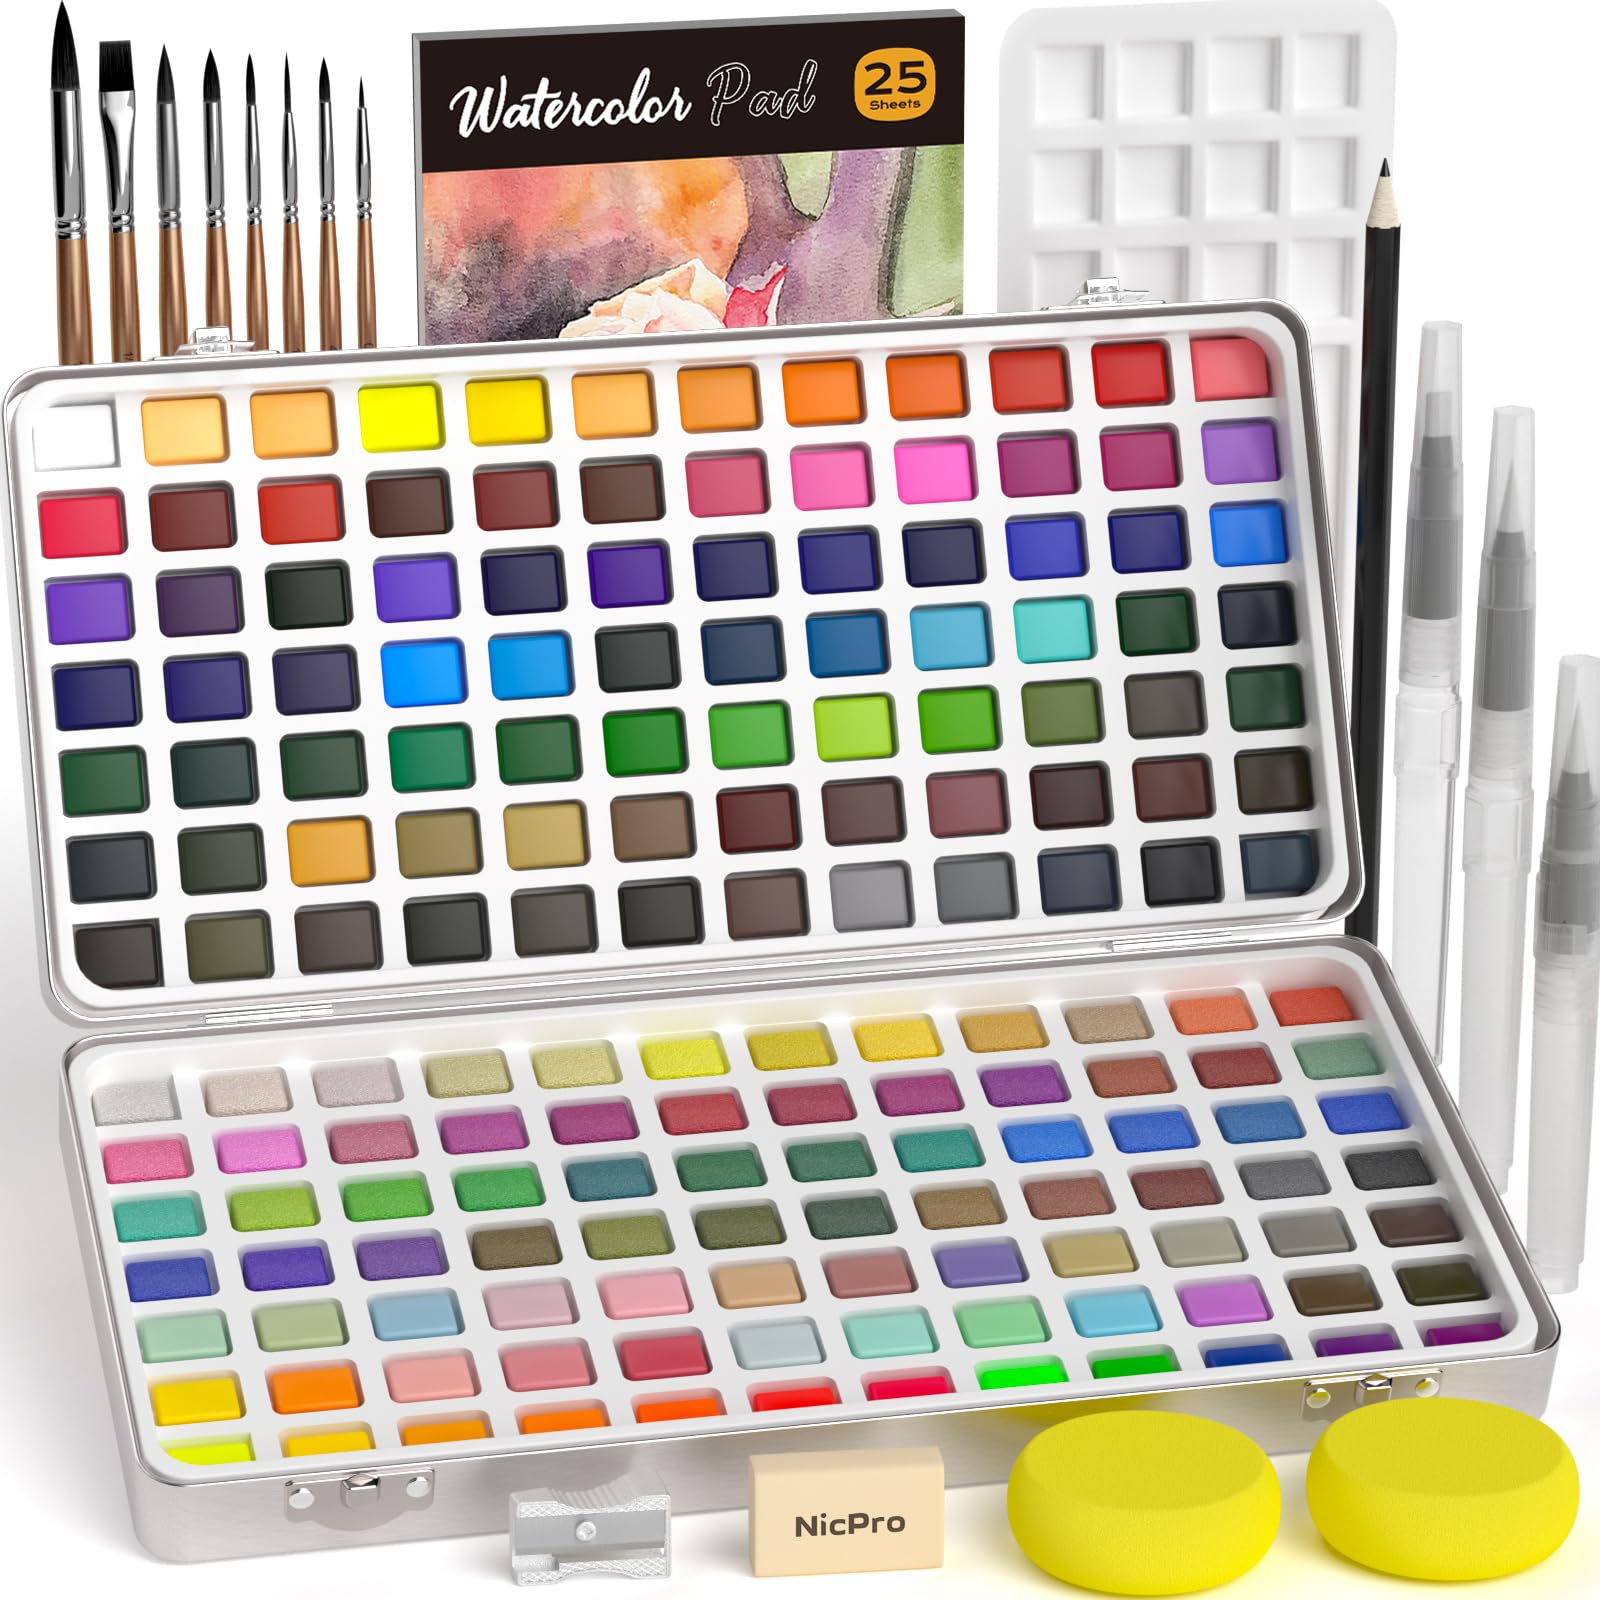 Nicpro 168 Colors Watercolor Paint Set include Metallic Macaron Candy Fluorescent, 8 Squirrel Painting Brushes, 25 Water Color Paper, Palette, Art Supplies Kit for Artist Adult Kid Beginner with Box